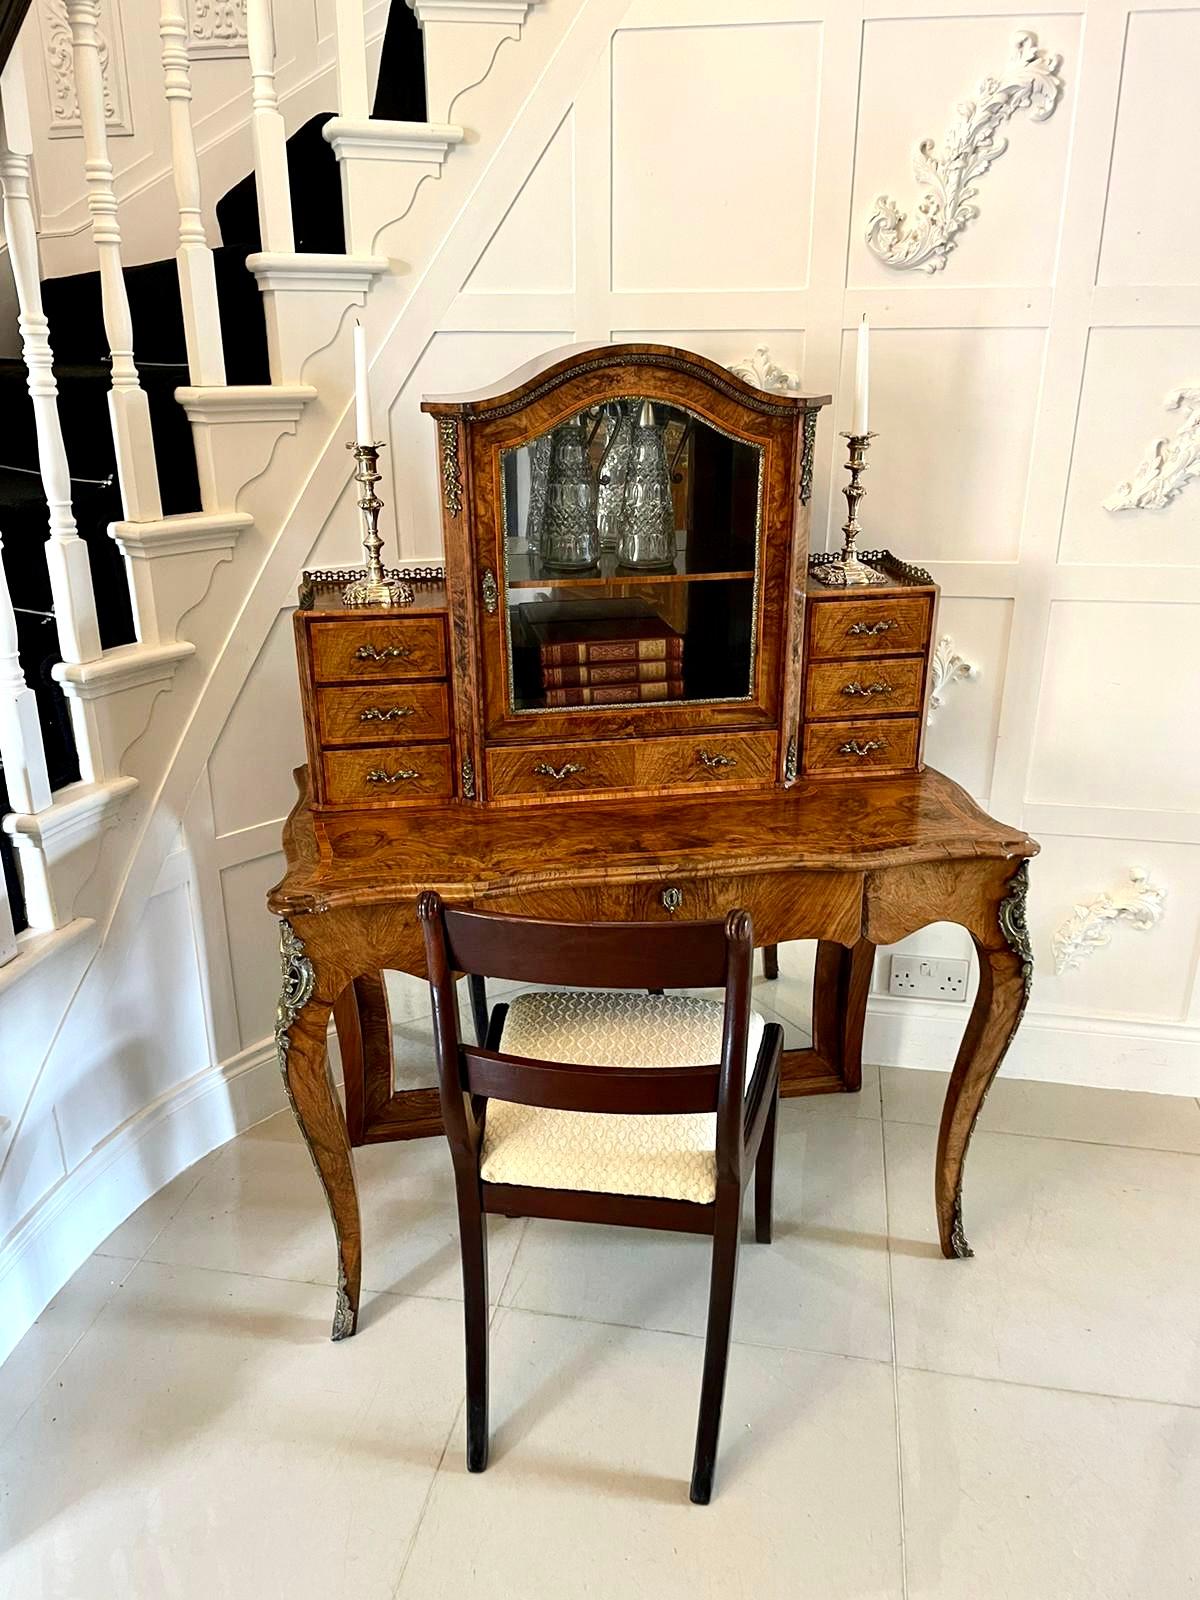 Outstanding quality antique Victorian burr walnut Bonheur de Jour writing desk having a beautifully designed and shaped top glazed cabinet to the centre which opens to reveal a fitted mirror and shelf interior with elegant ormolu mounts to the